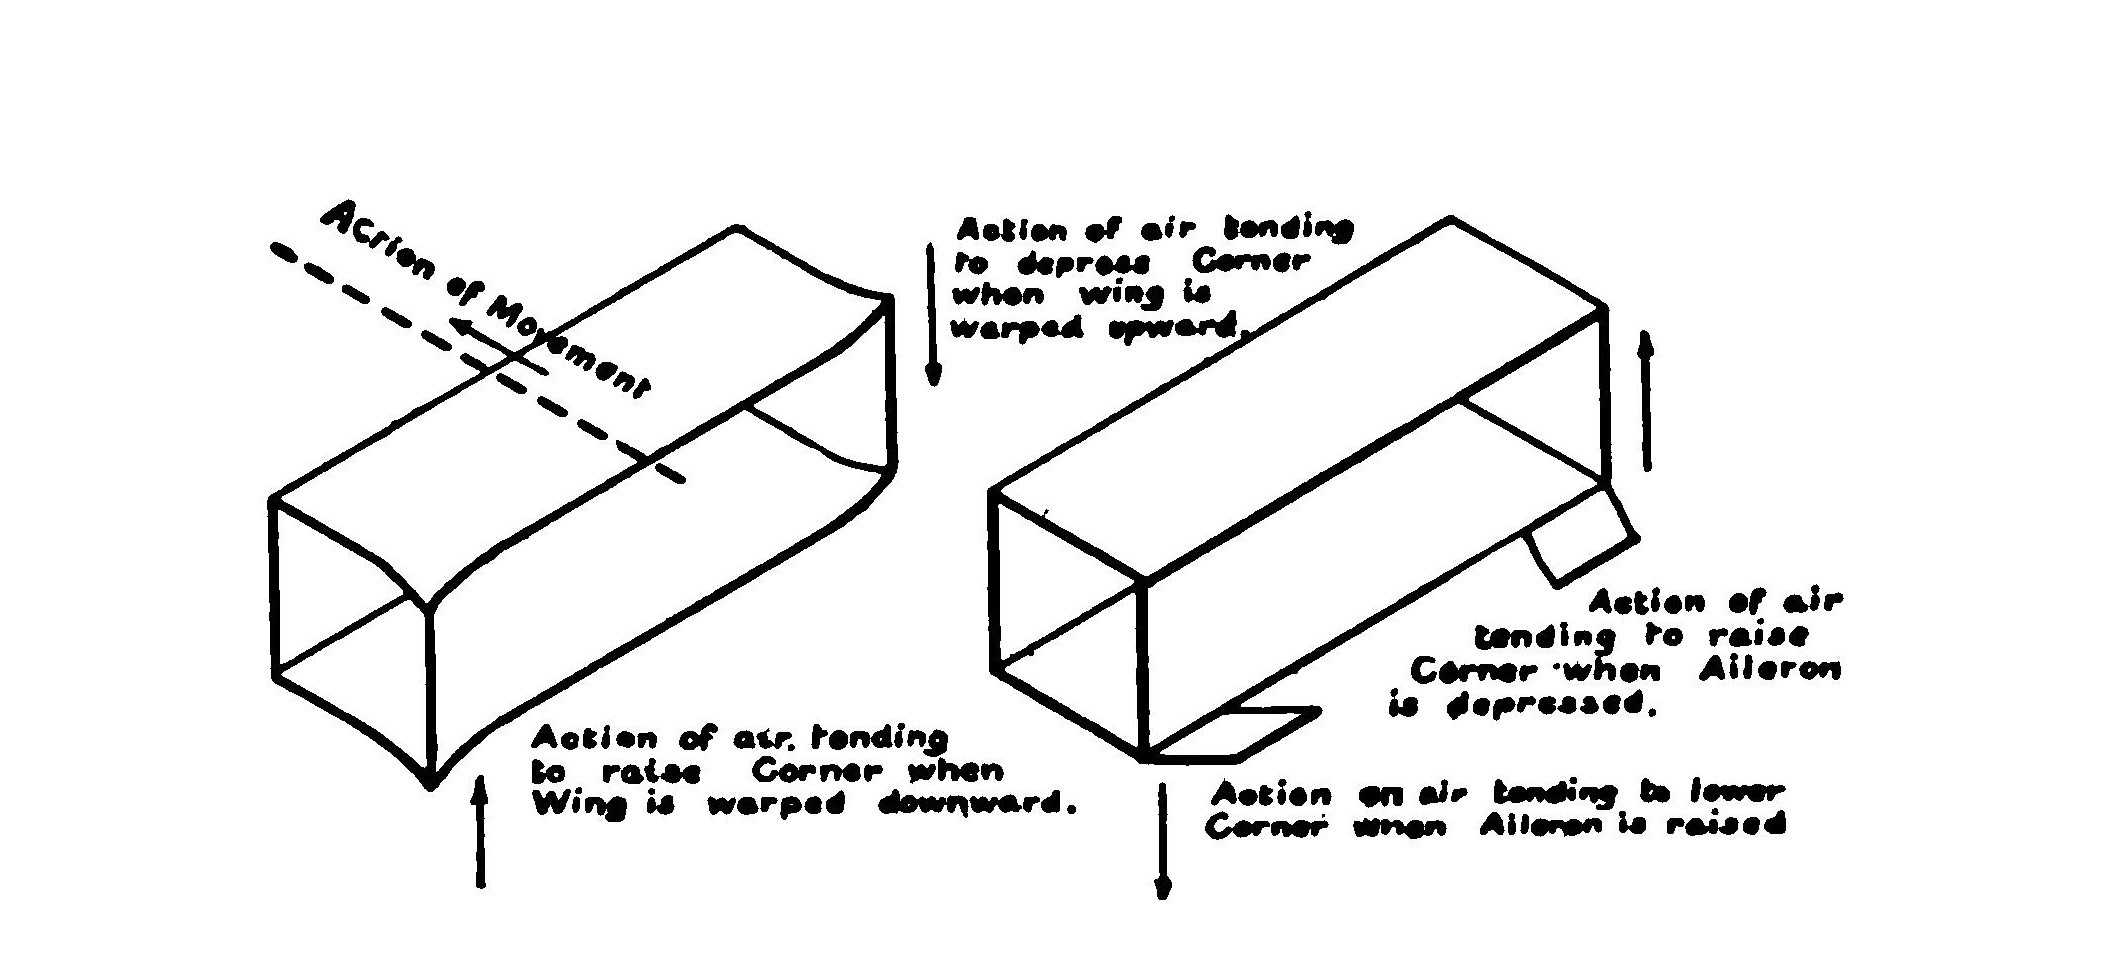 FIG. 4. Two methods of controlling the lateral stability of an aeroplane.